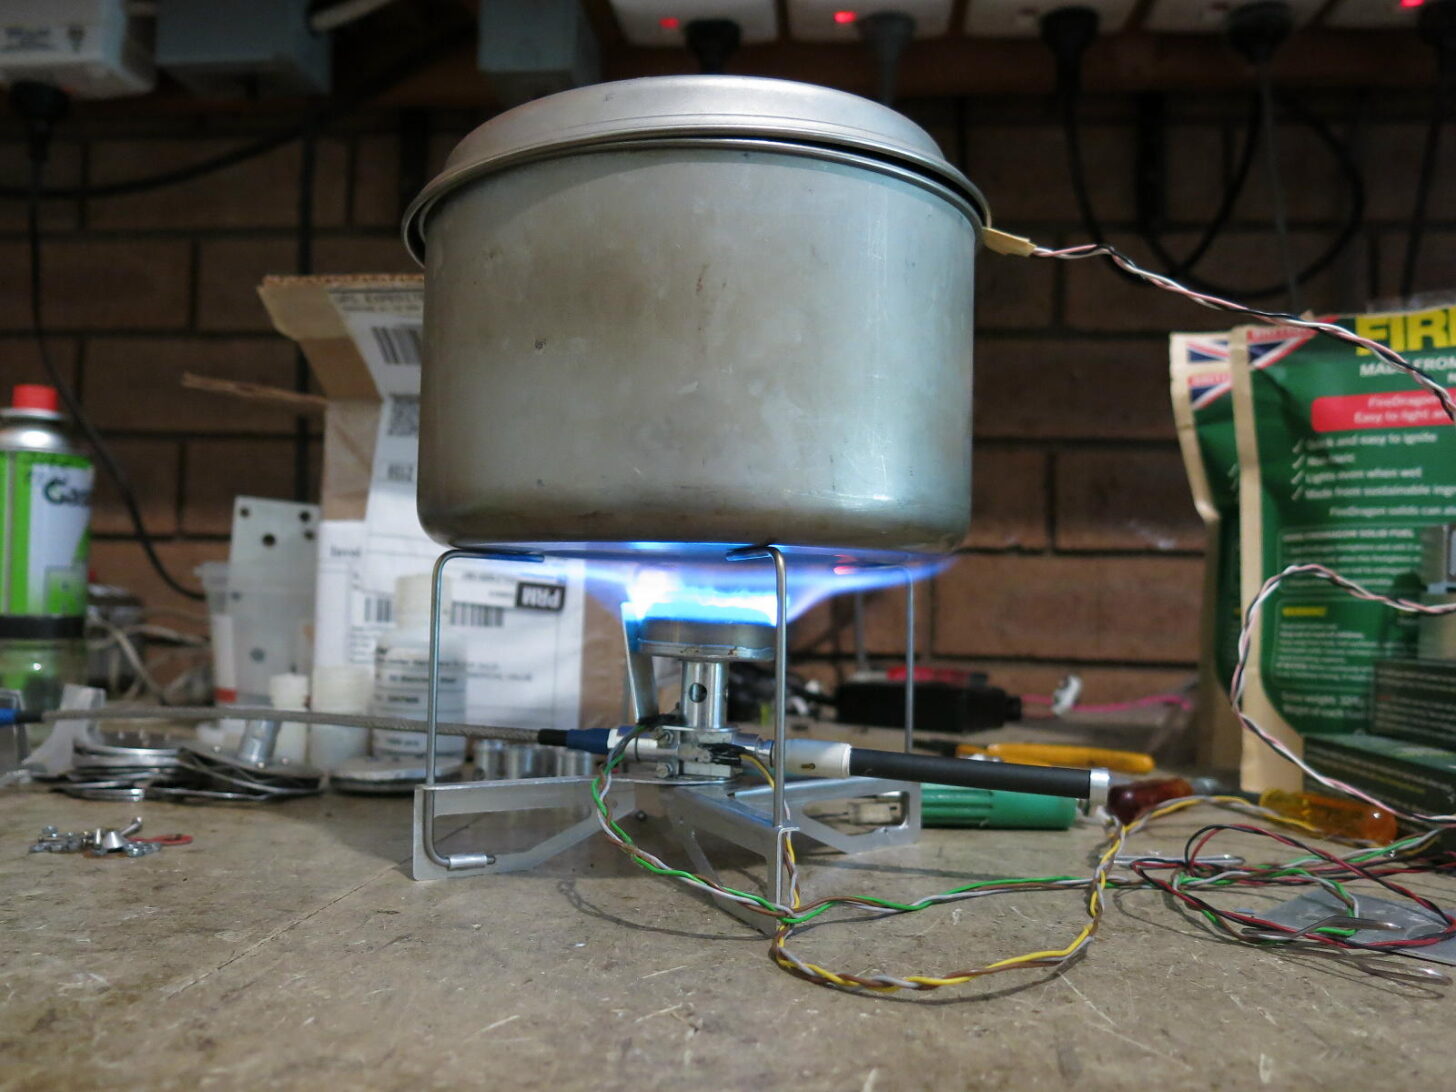 a lit stove and pot in a workshop